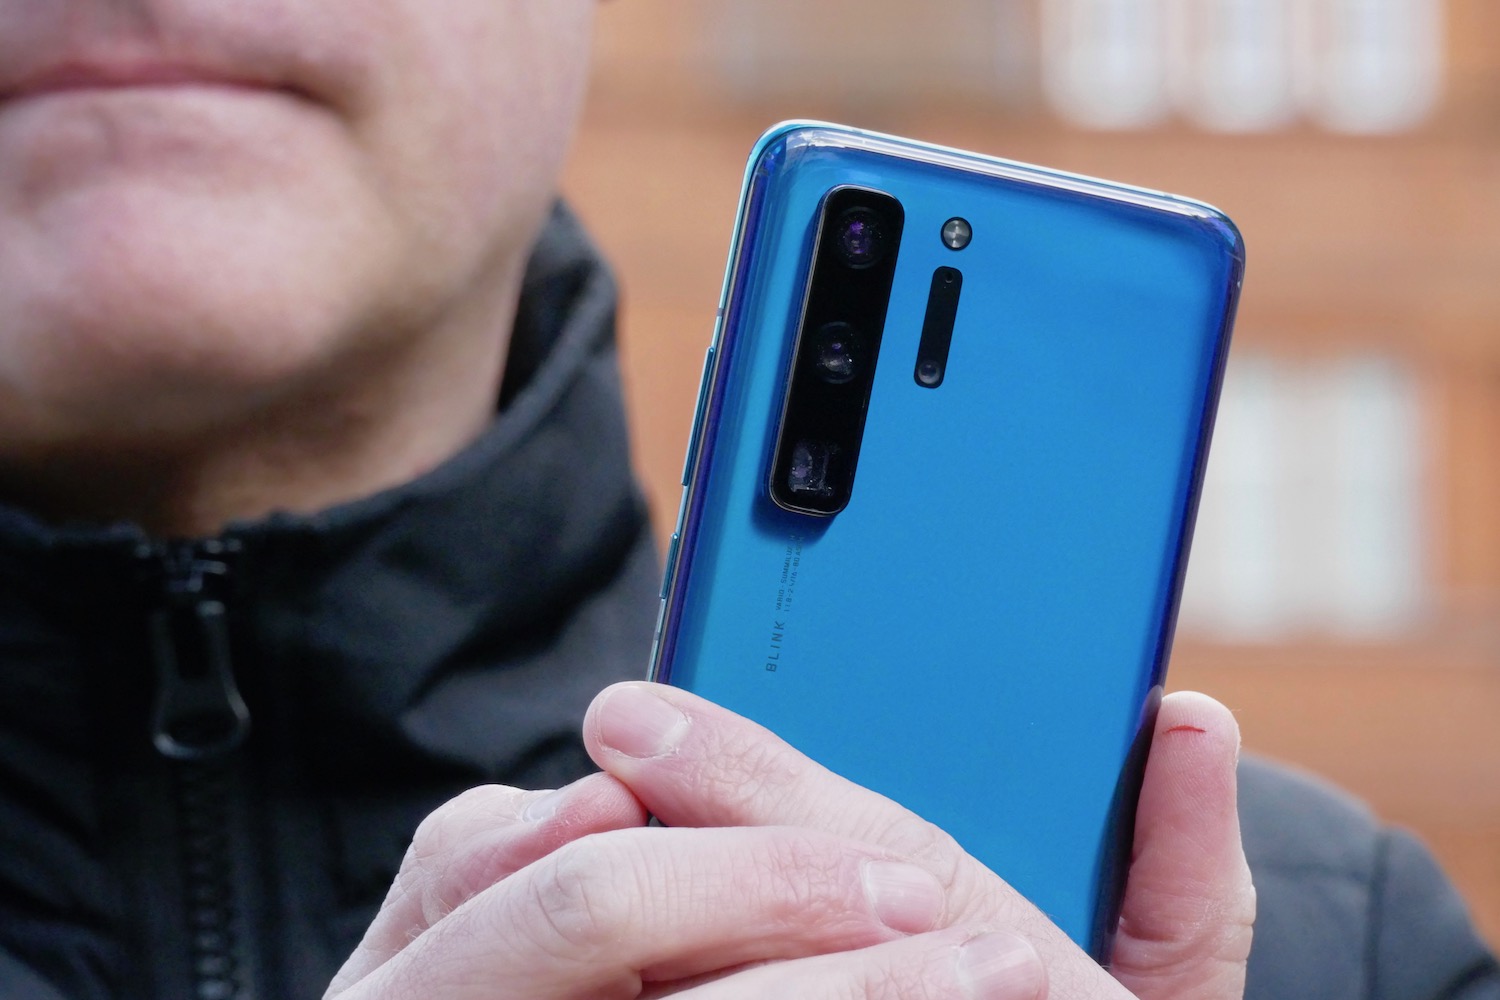 Huawei's P40 Pro is coming in March, and it won't have Google